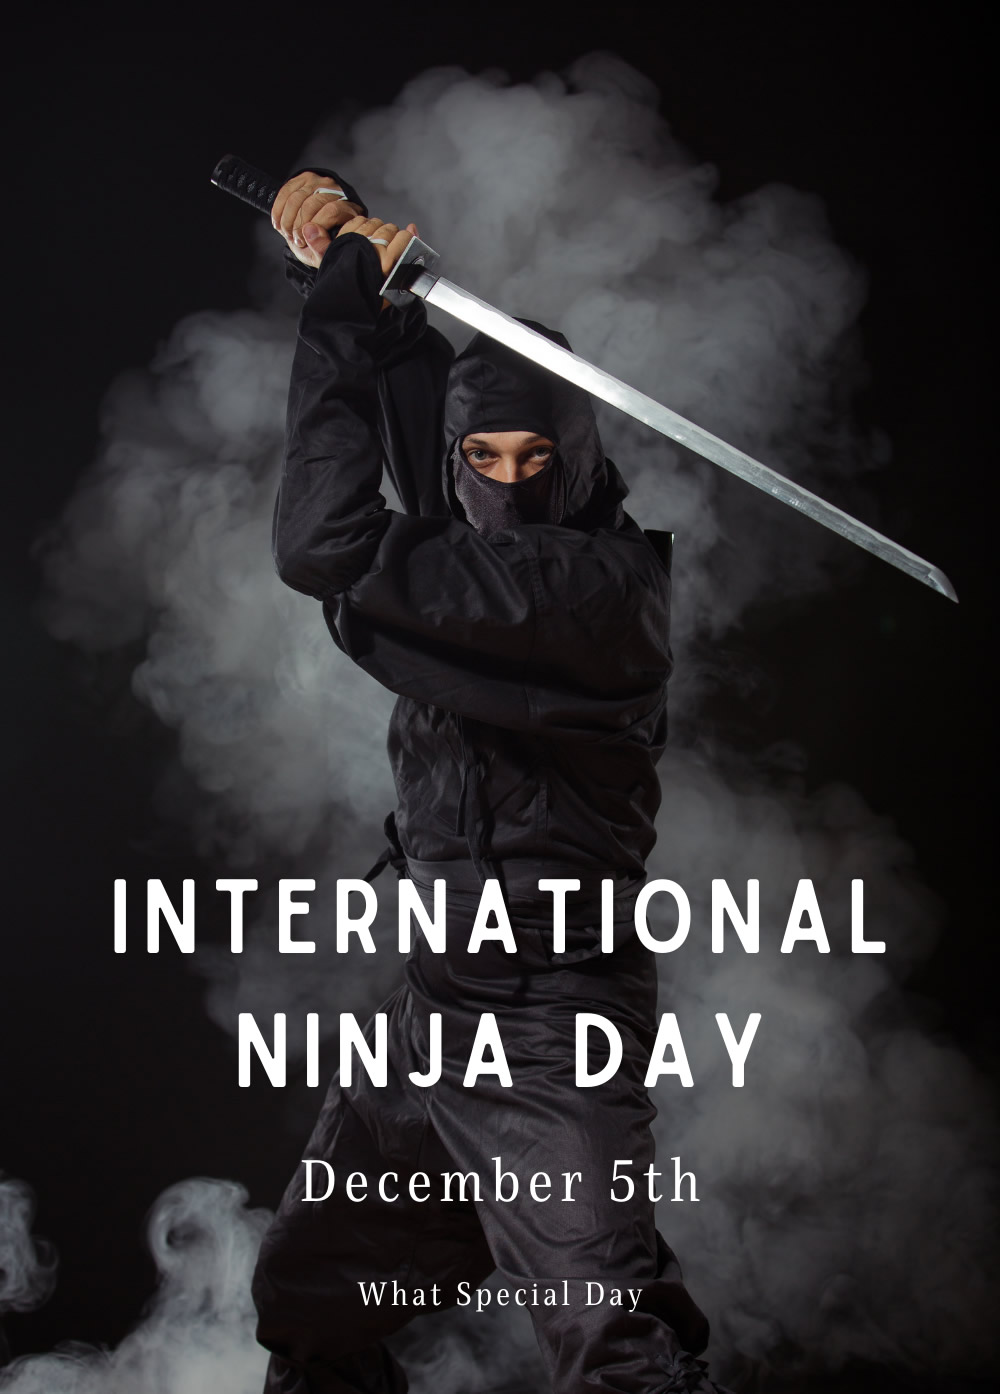 International Ninja Day (Dec 5th) What Special Day